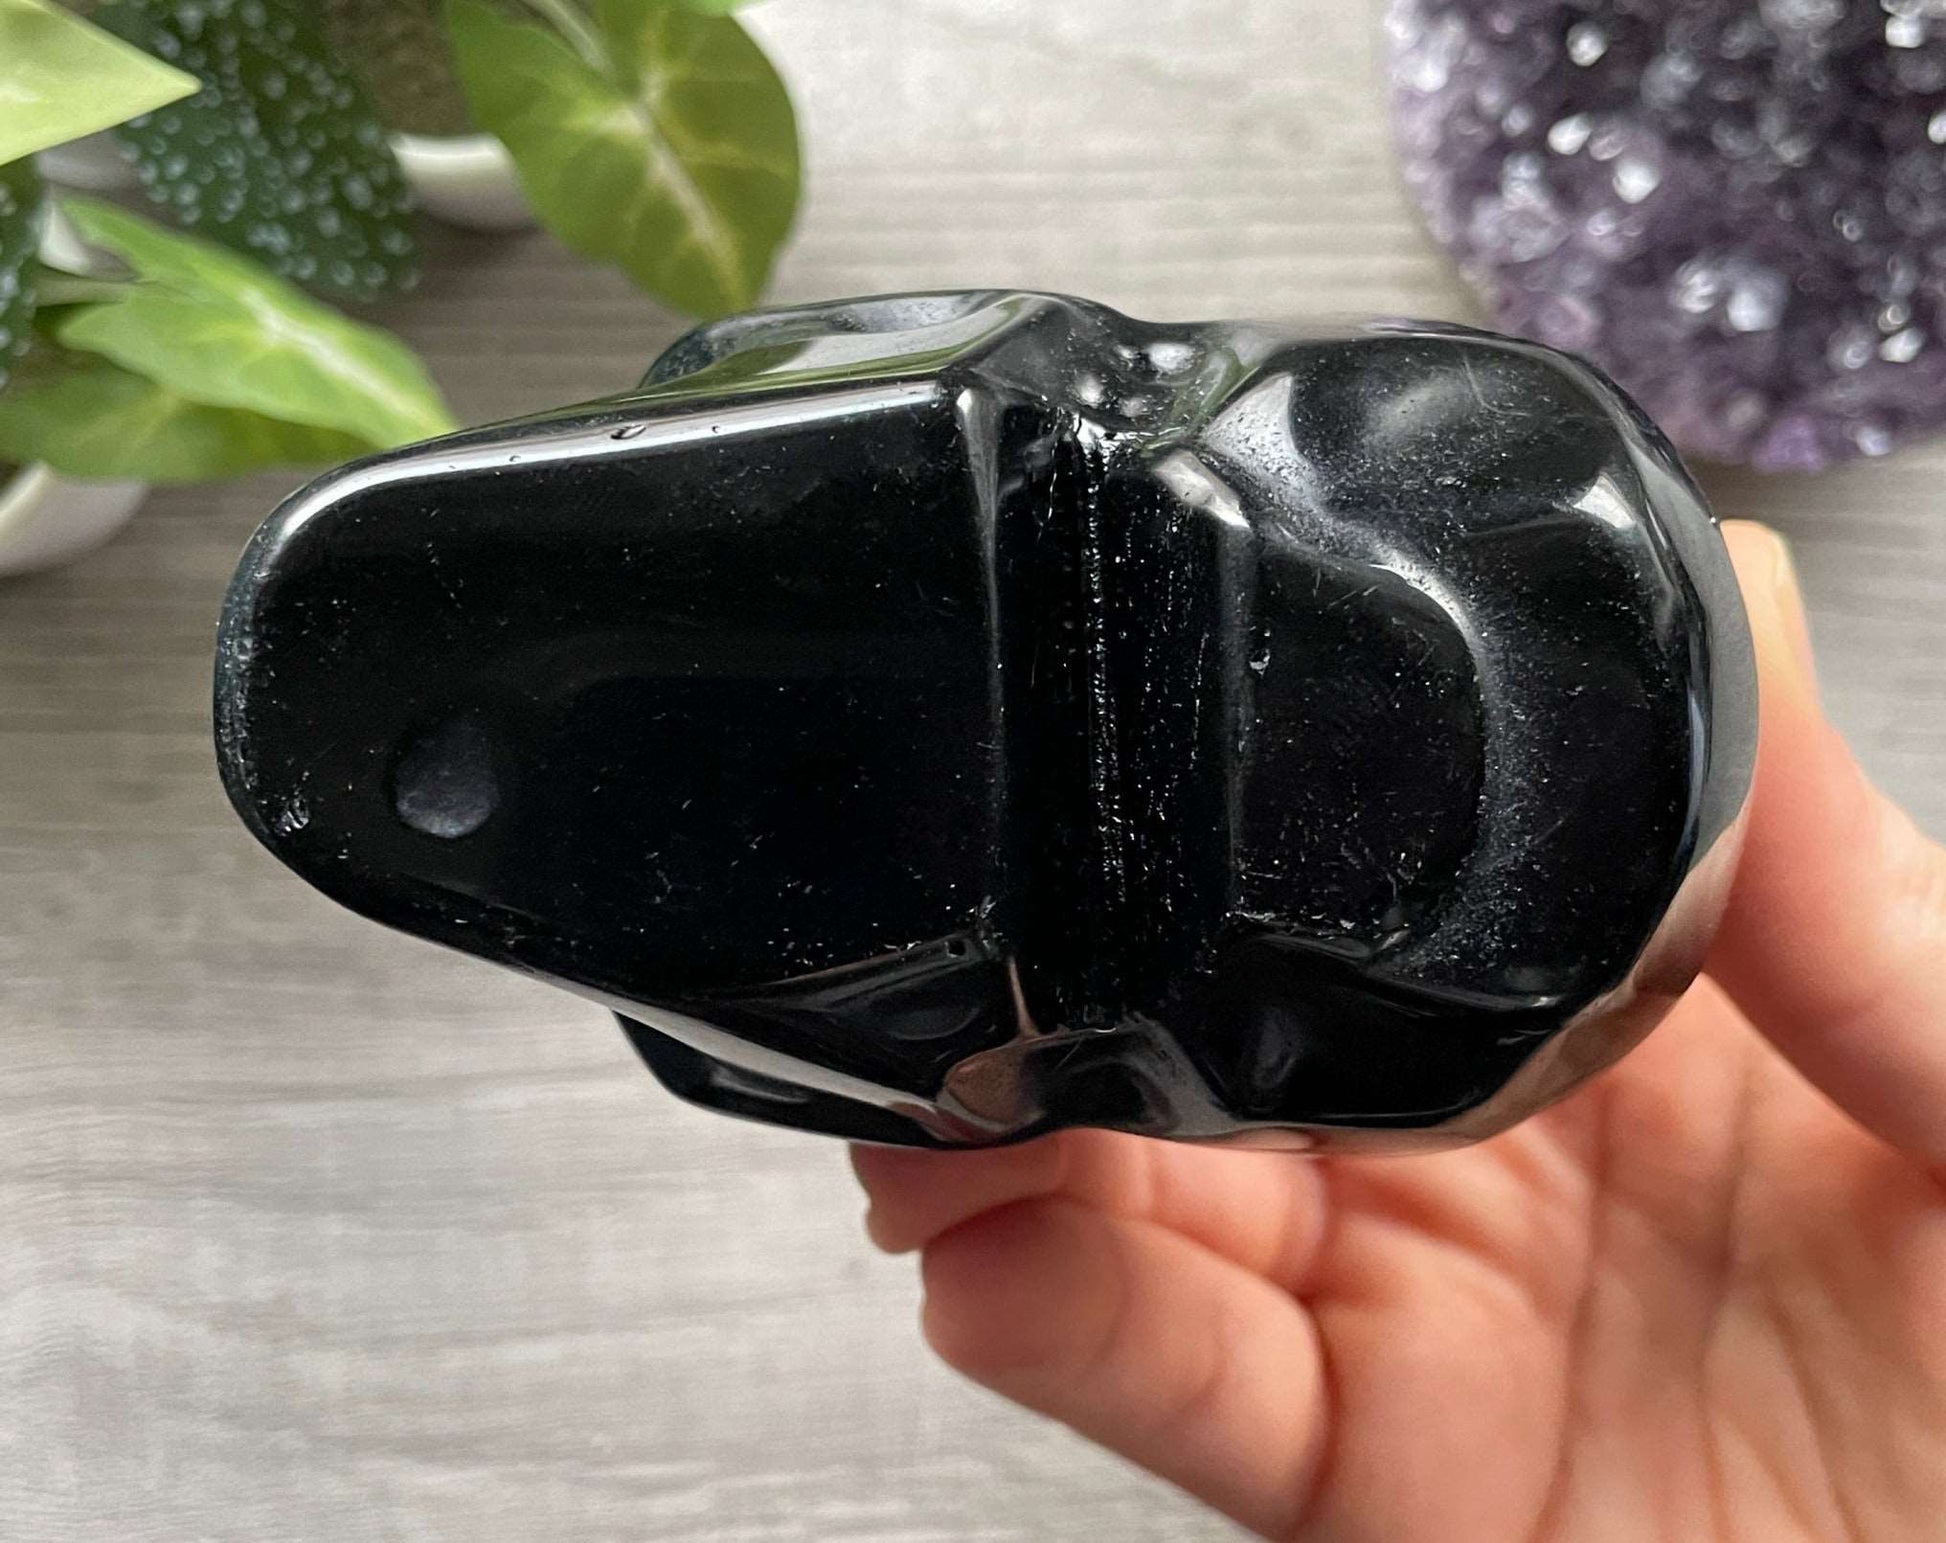 Pictured is a large skull carved out of black obsidian.